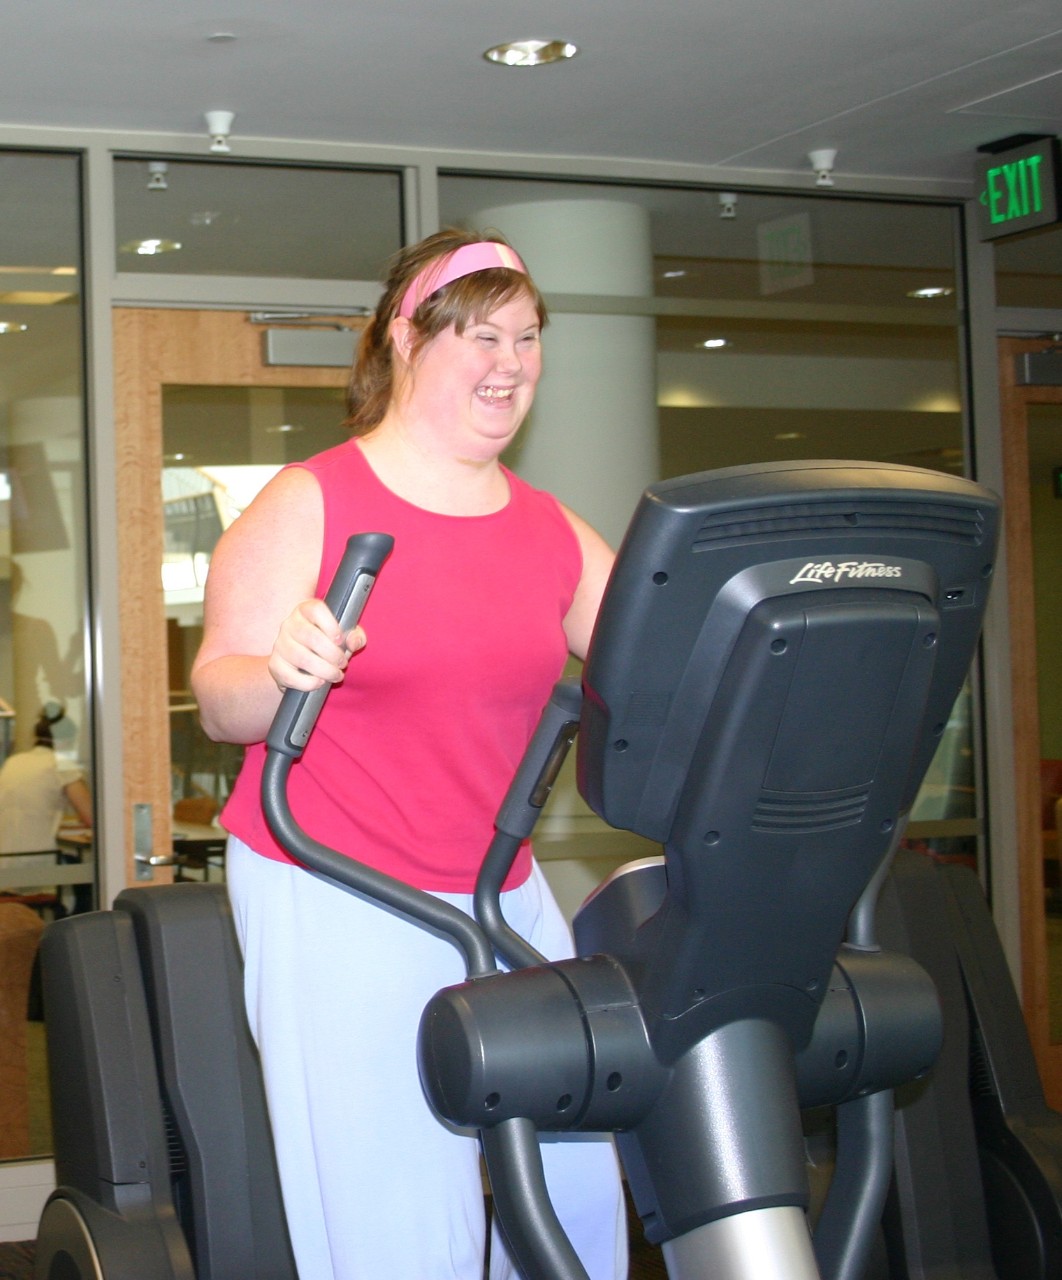 Jeanne Gavigan when she was at Next Steps, smiling and in bright pink workout clothes on a treadmill